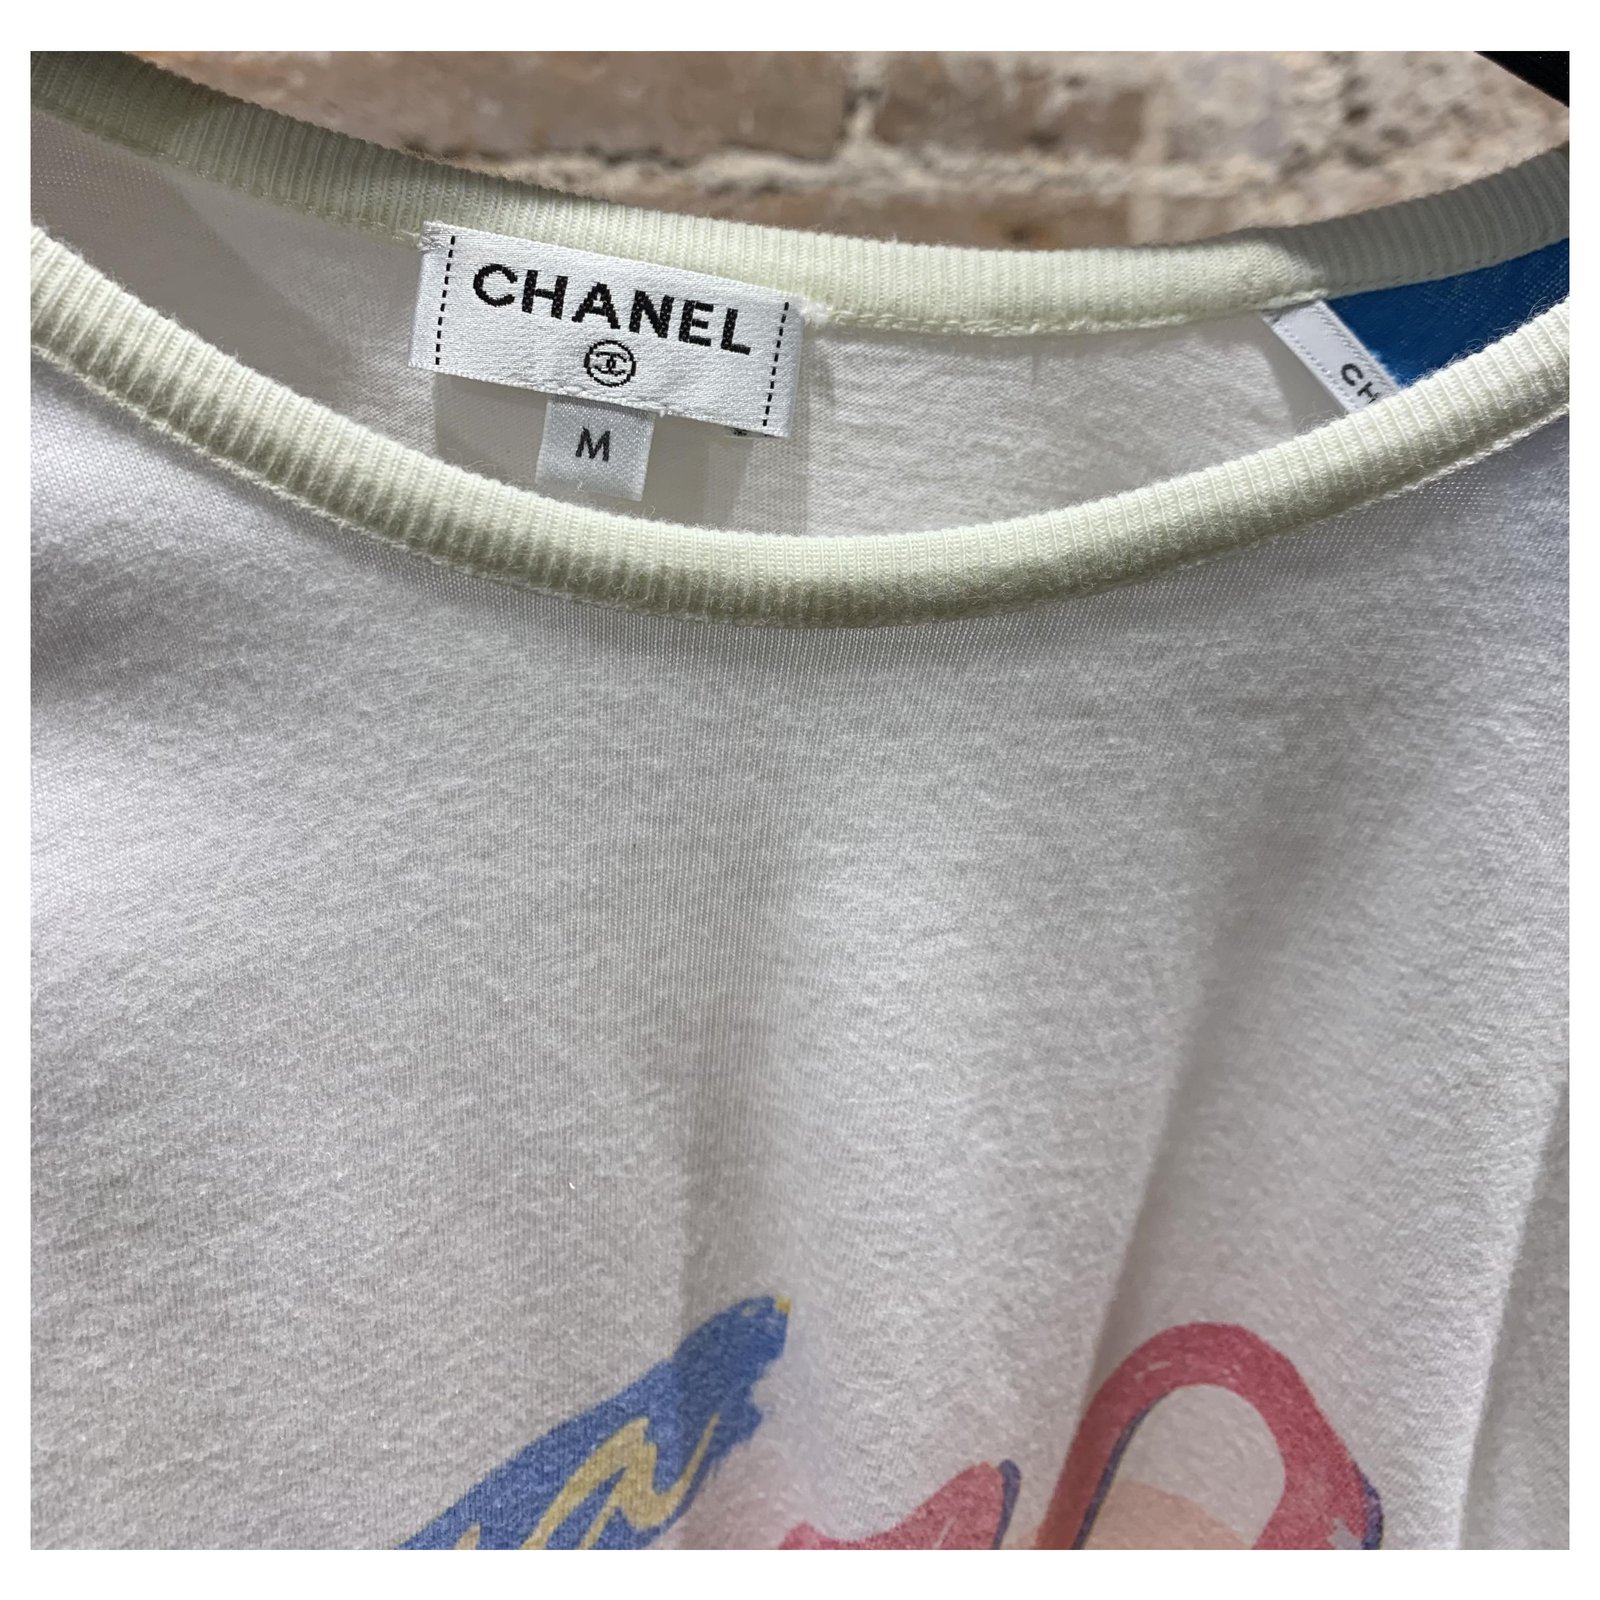 CHANEL, Tops, Authentic Chanel Tee